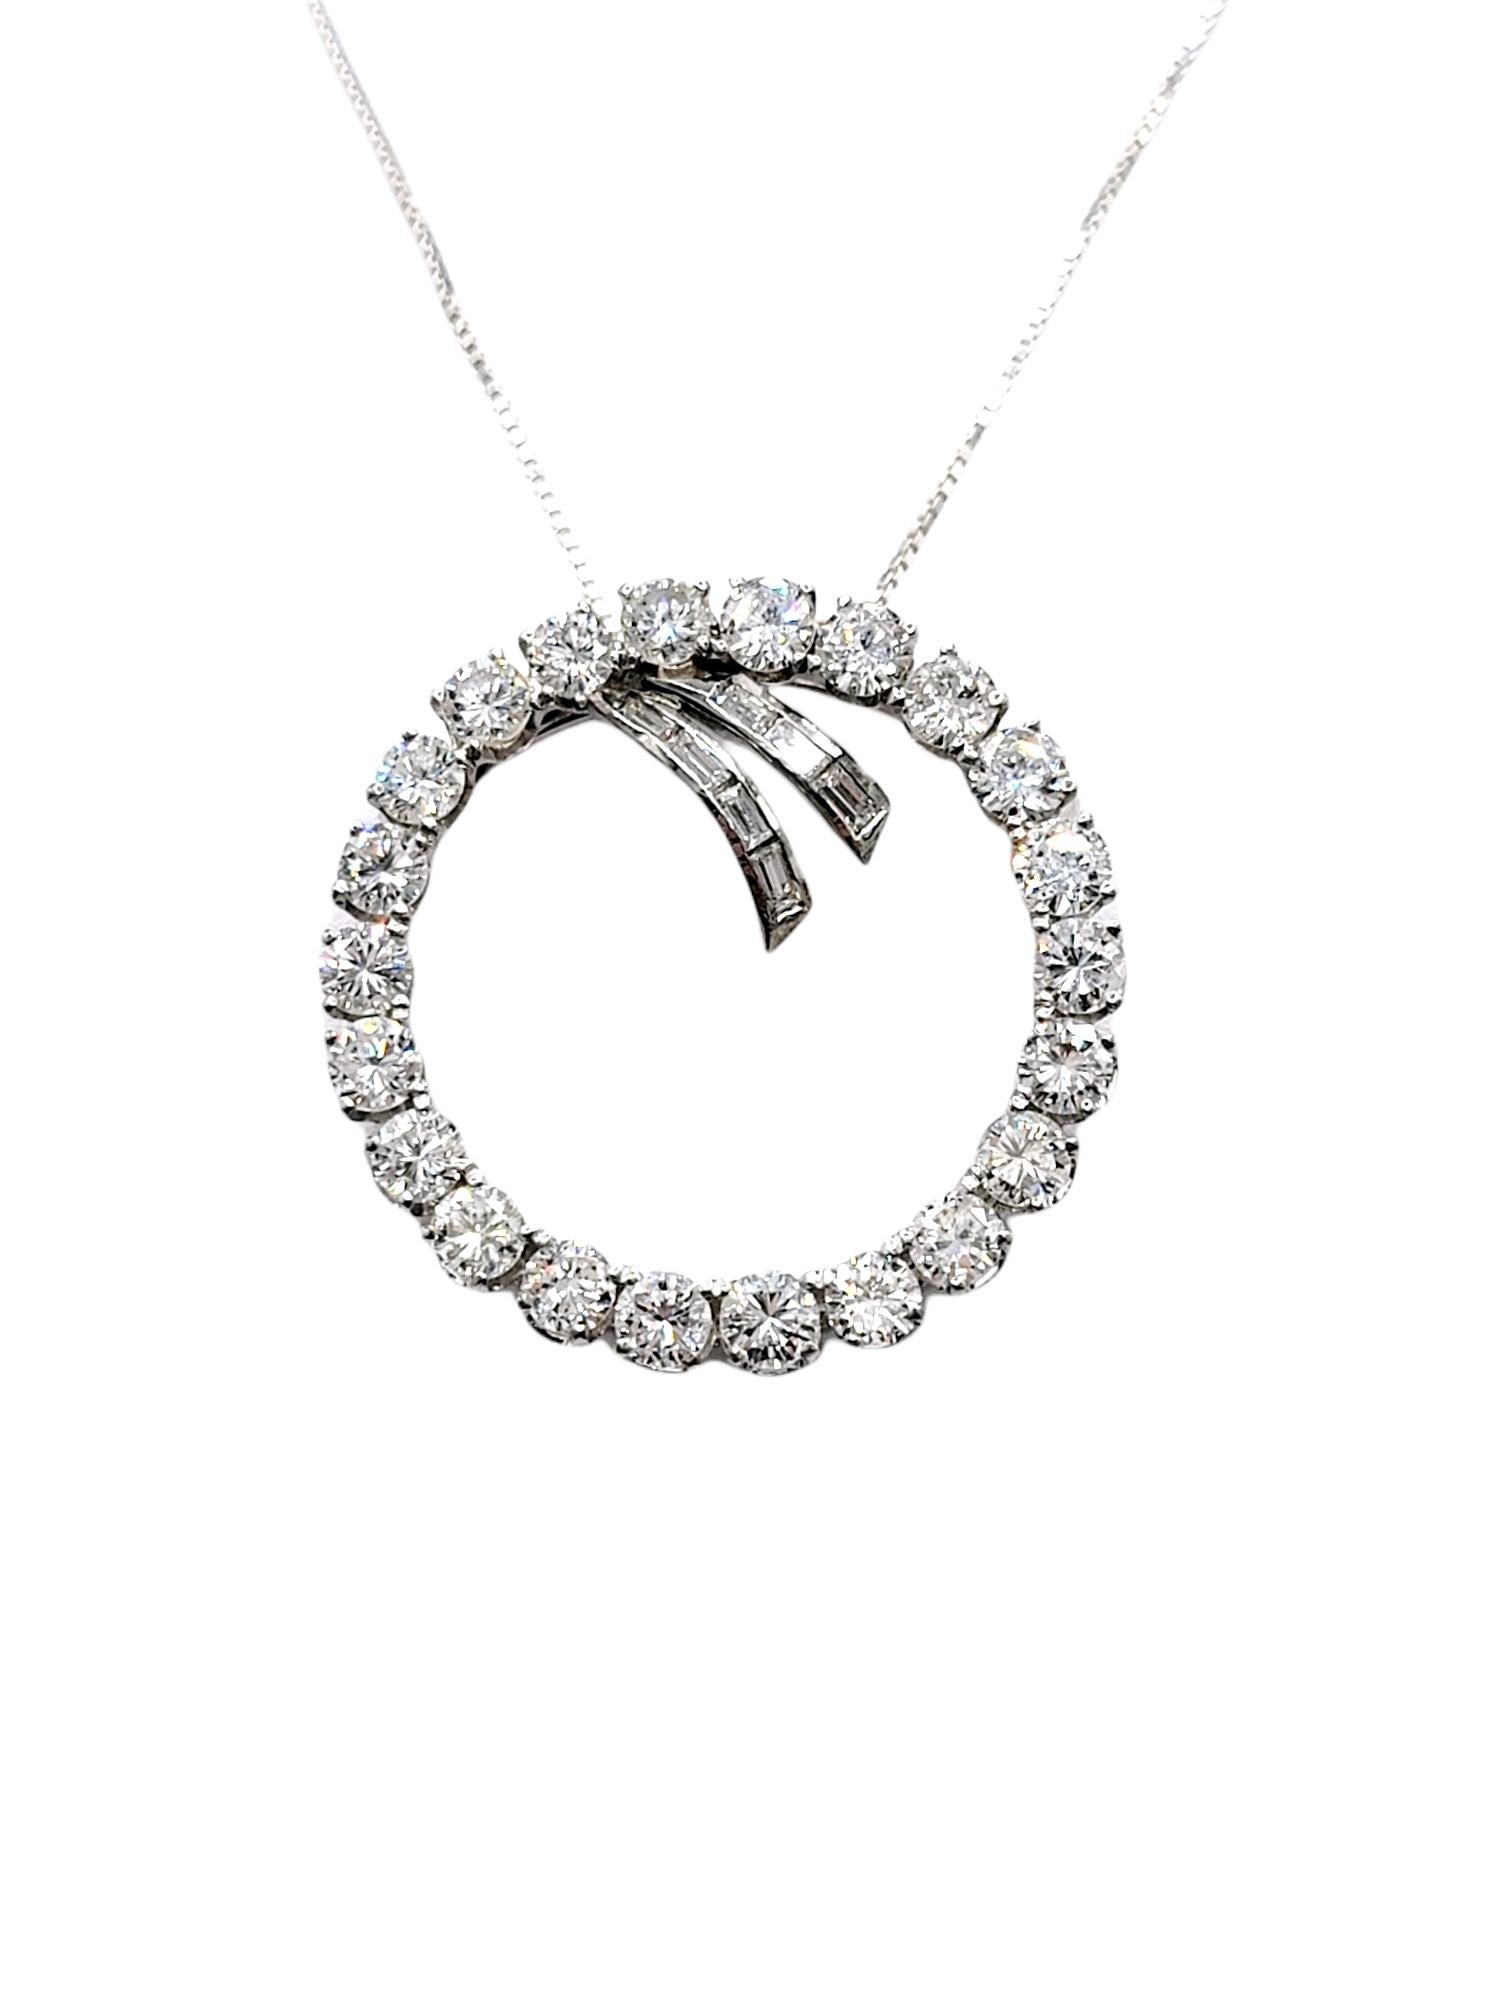 Large Open Circle and Bow 5.50 Carats Diamond Brooch / Pendant Set in Platinum 4